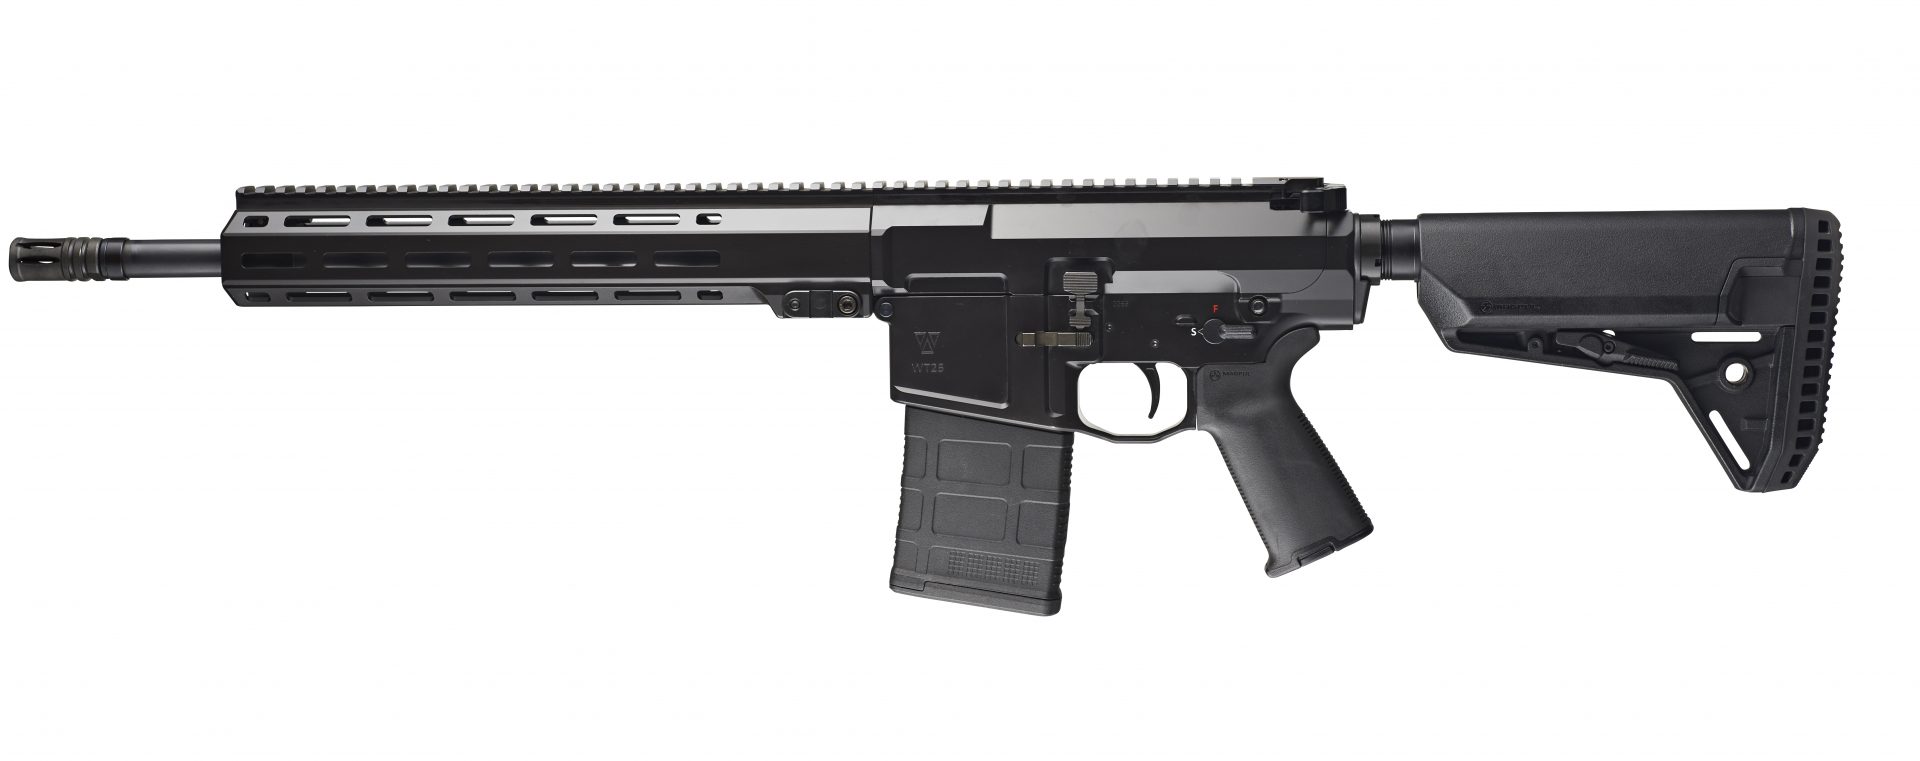 WT25 – 16″ 308 SEMI-AUTOMATIC RIFLE – Wedgetail Industries – We build ...